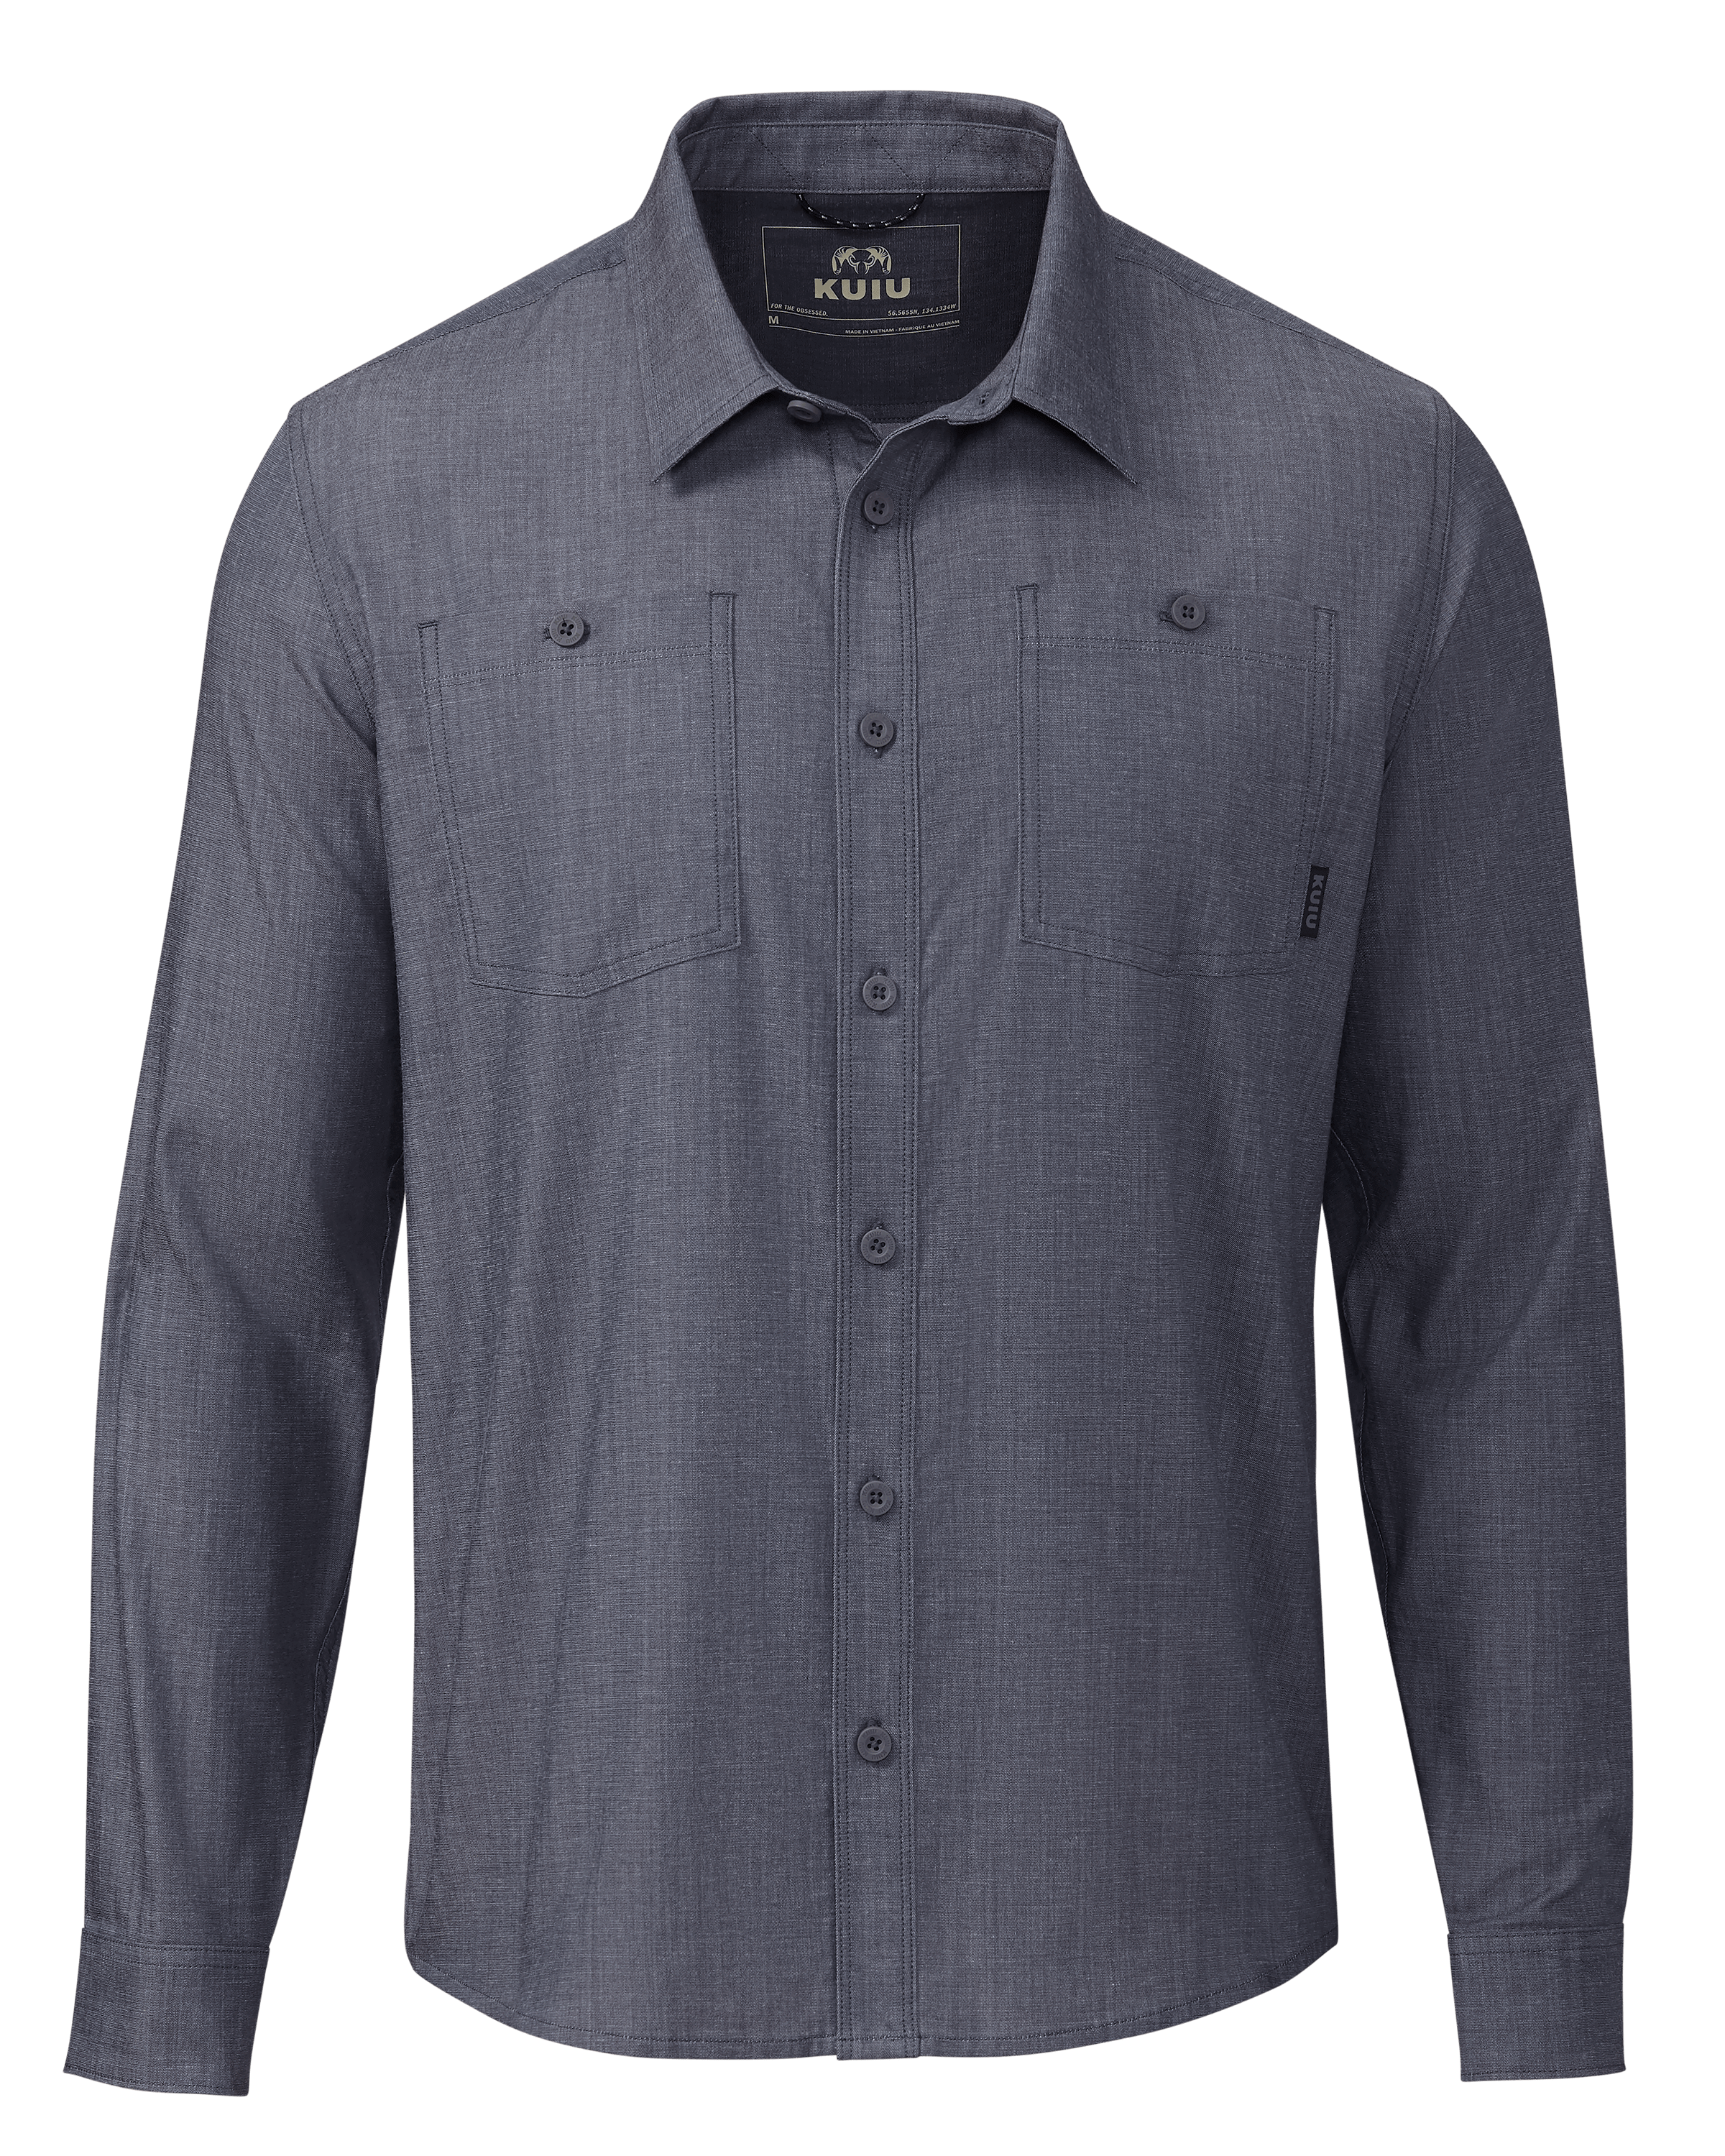 KUIU Terrace Long Sleeves Hunting Shirt in Steel Blue Chambray | Size 3XL